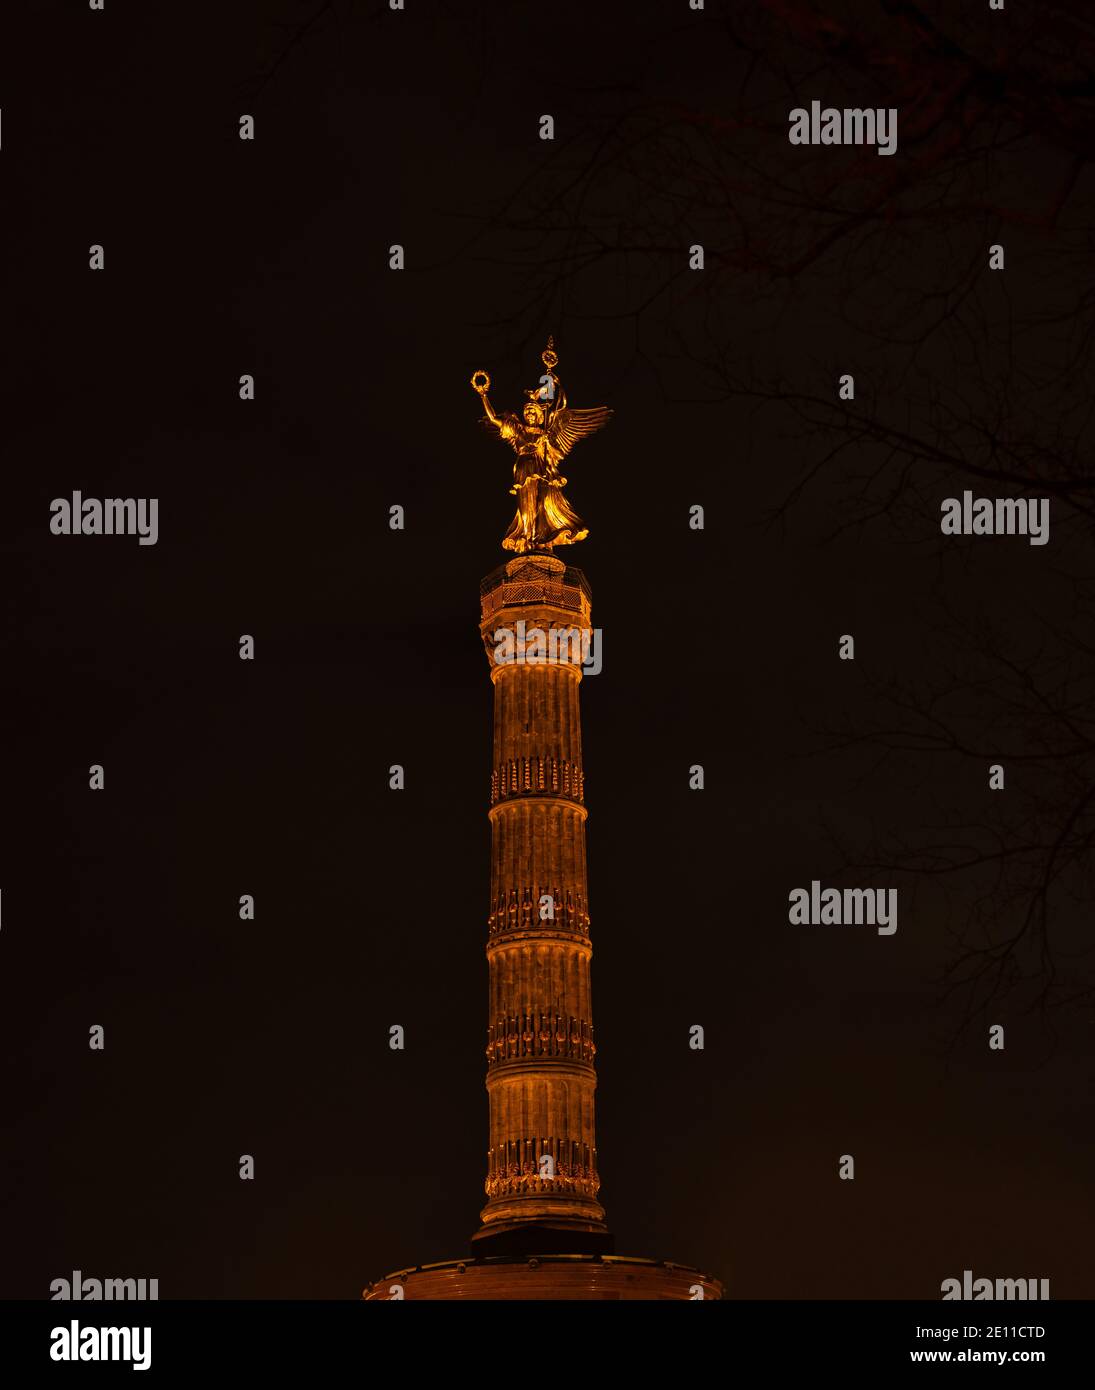 The victory column (german: Siegessäule) at the Großer Stern in Berlin at night Stock Photo